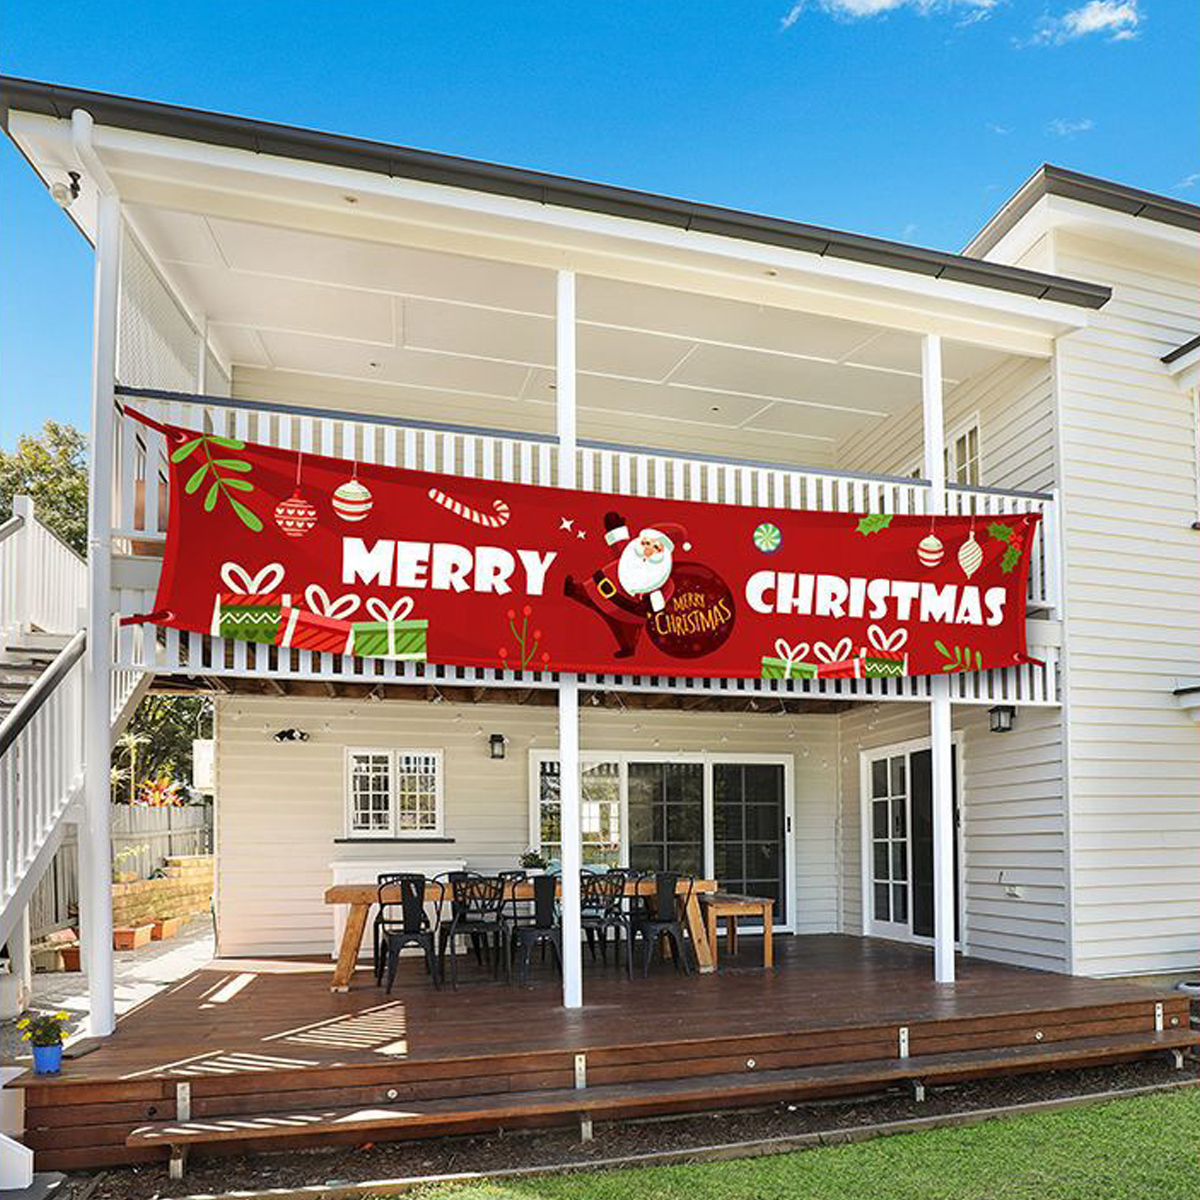 3M-Merry-Christmas-Outdoor-Banner-Oxford-Large-Hanging-Bunting-Xmas-Door-Wall-Decoration-Photography-1764541-4